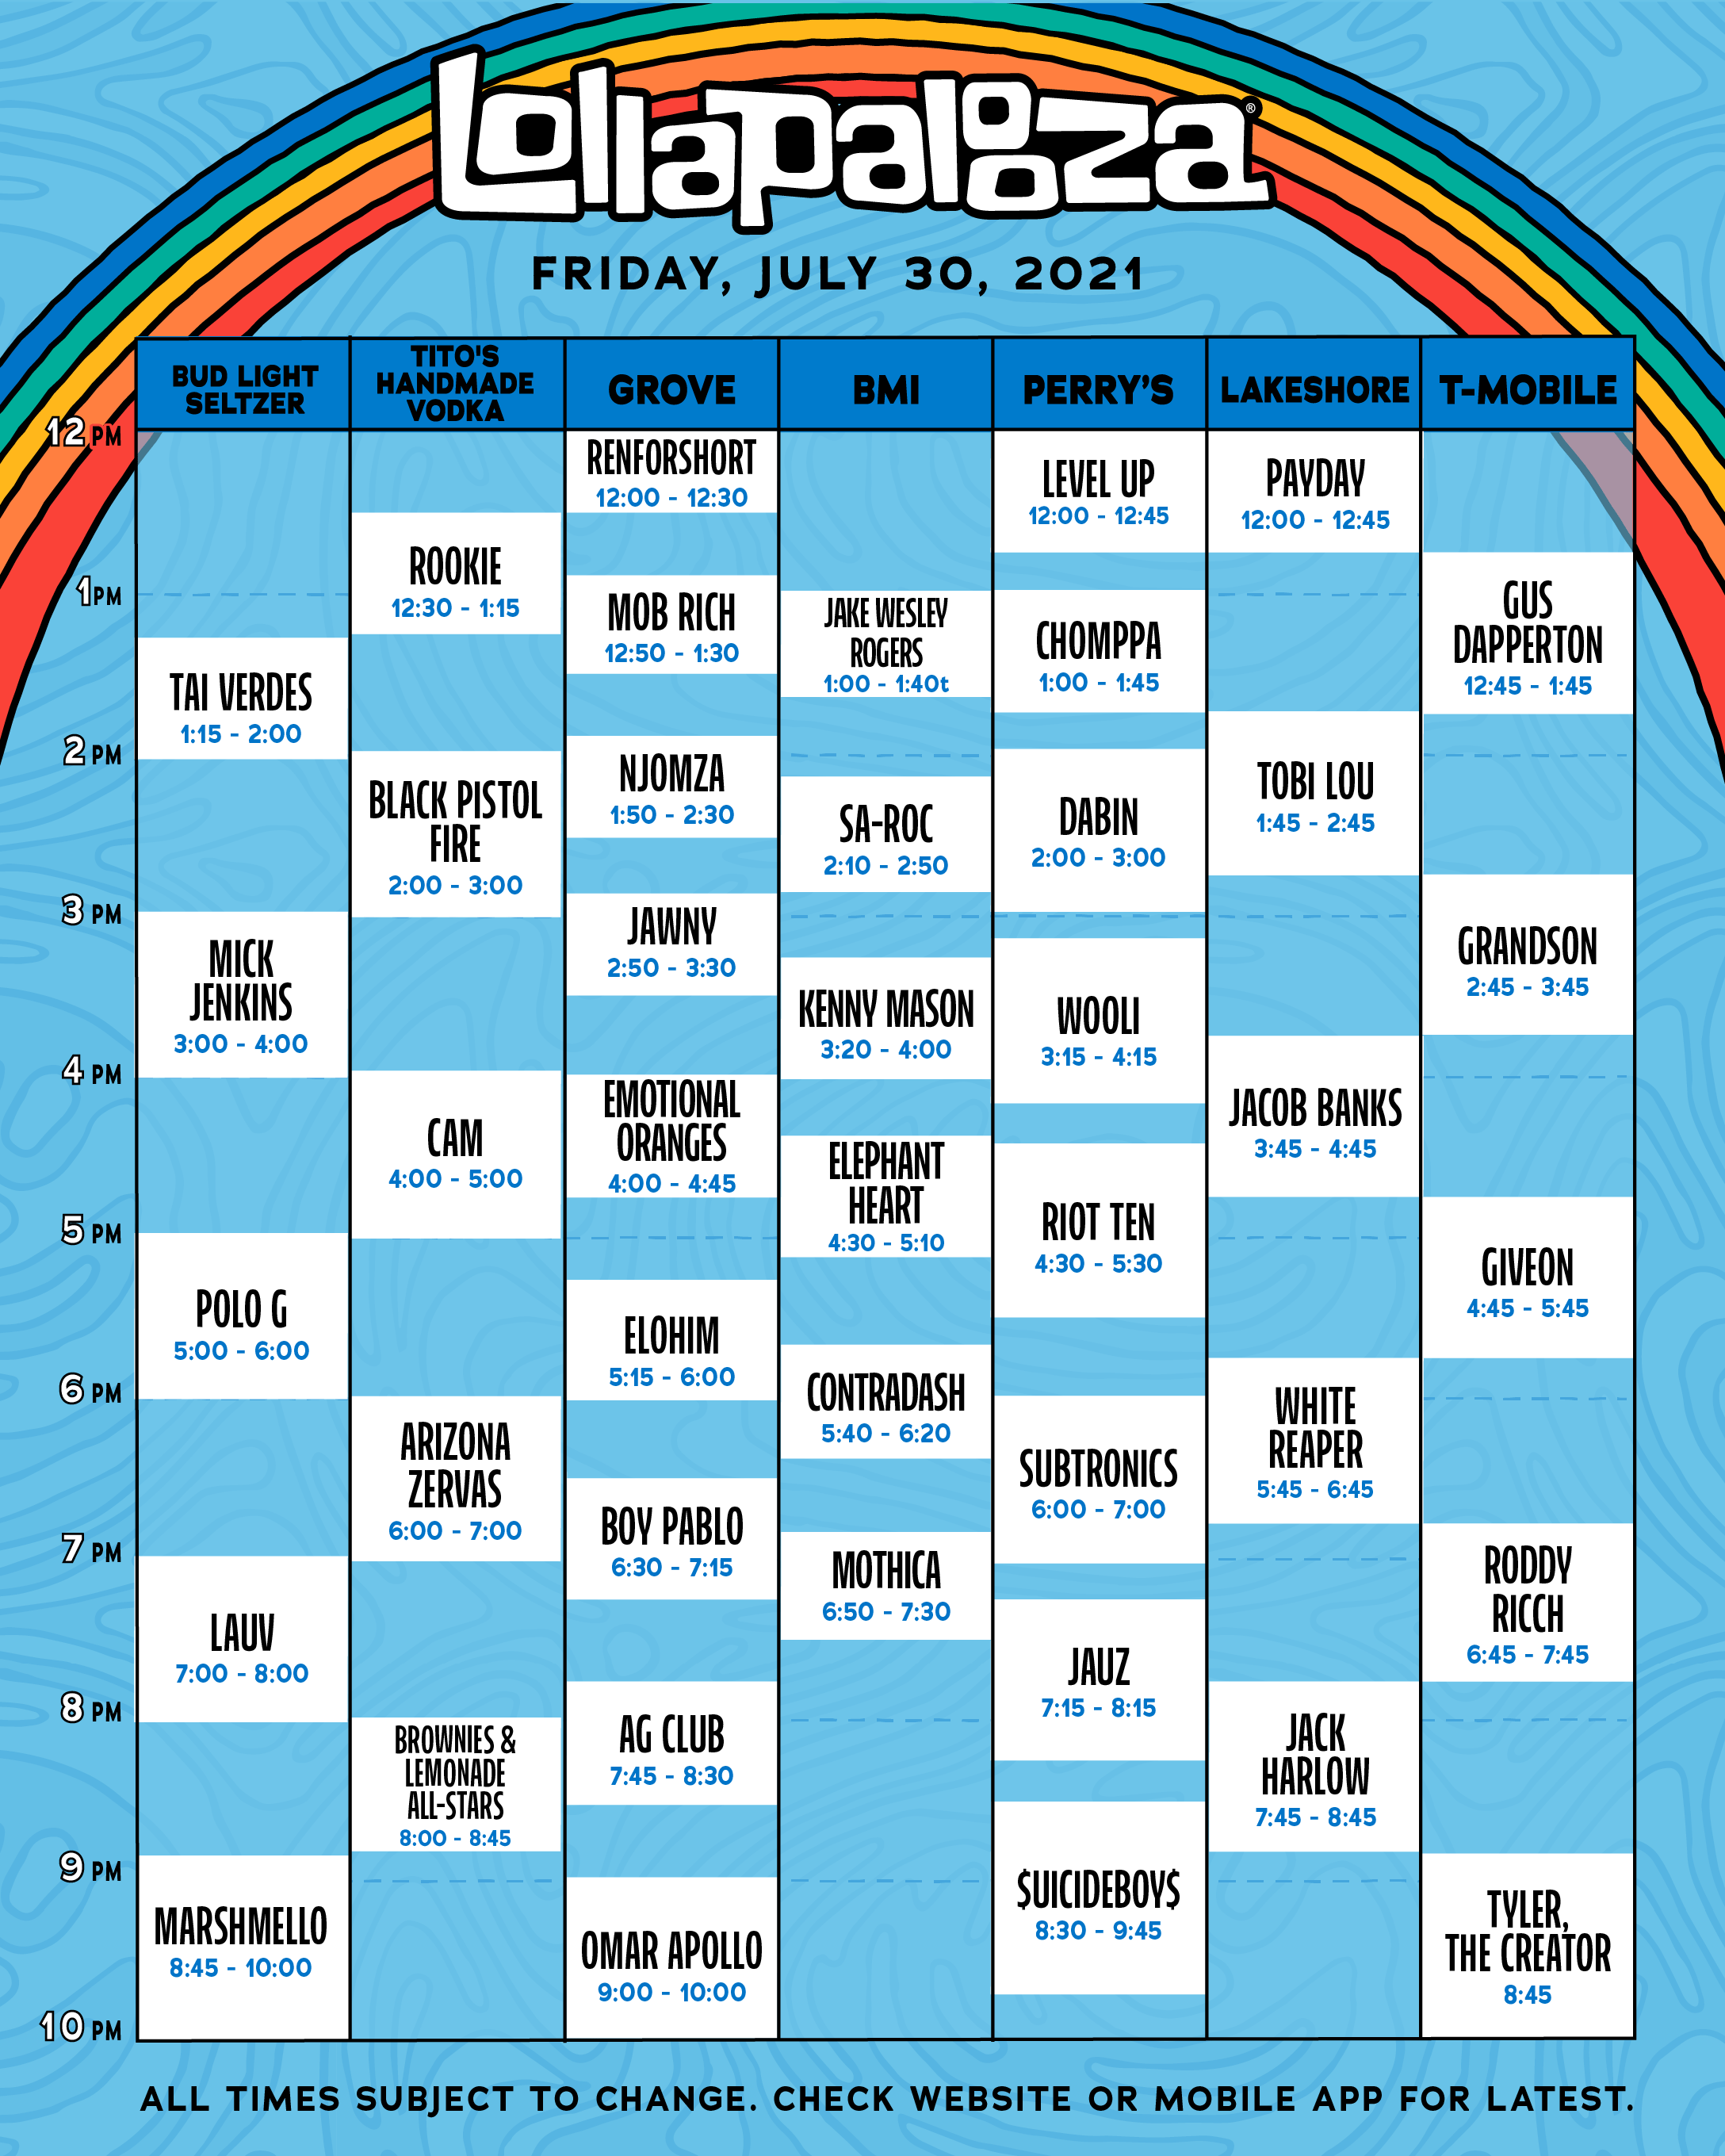 Lollapalooza Full 2021 Schedule Announced! 2